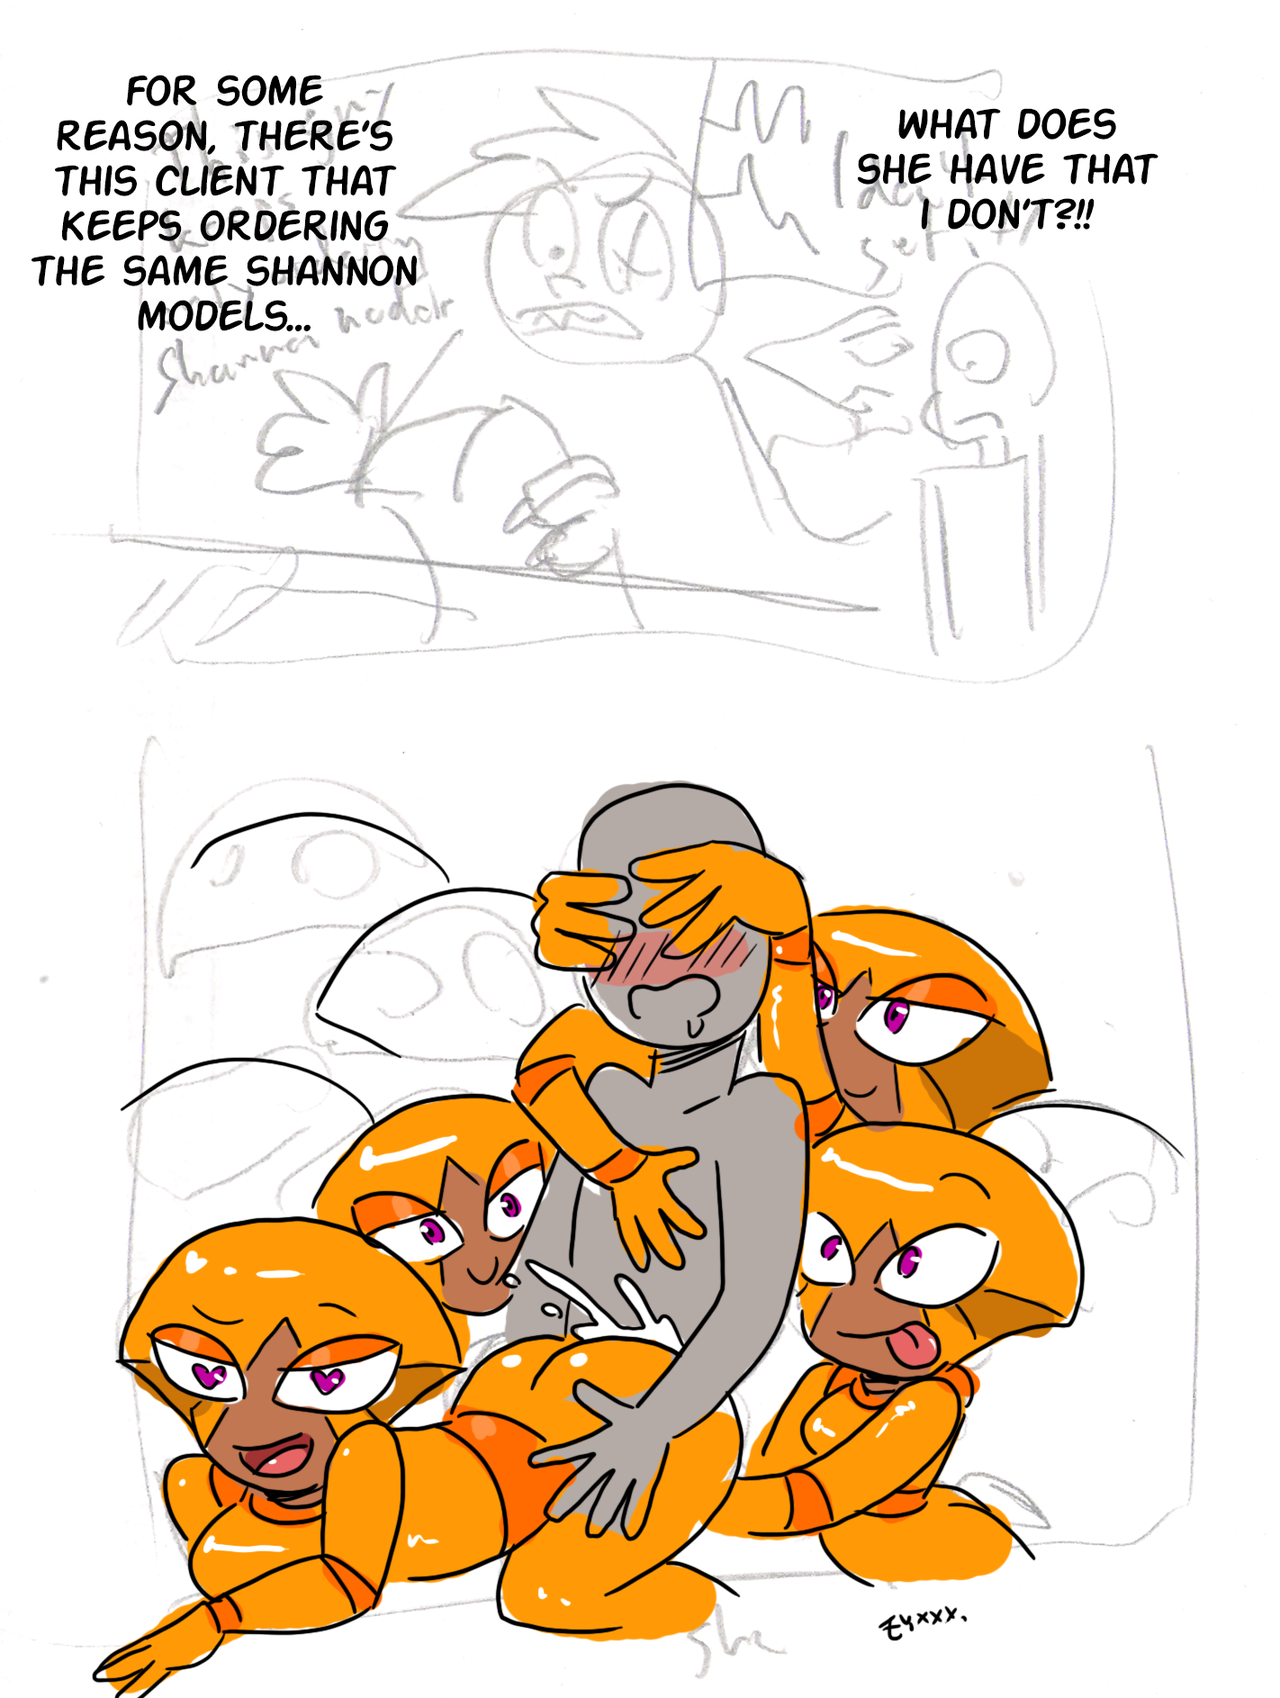 eyxxx: Since you all liked my Shannon mini-comic, here’s an alternate version!